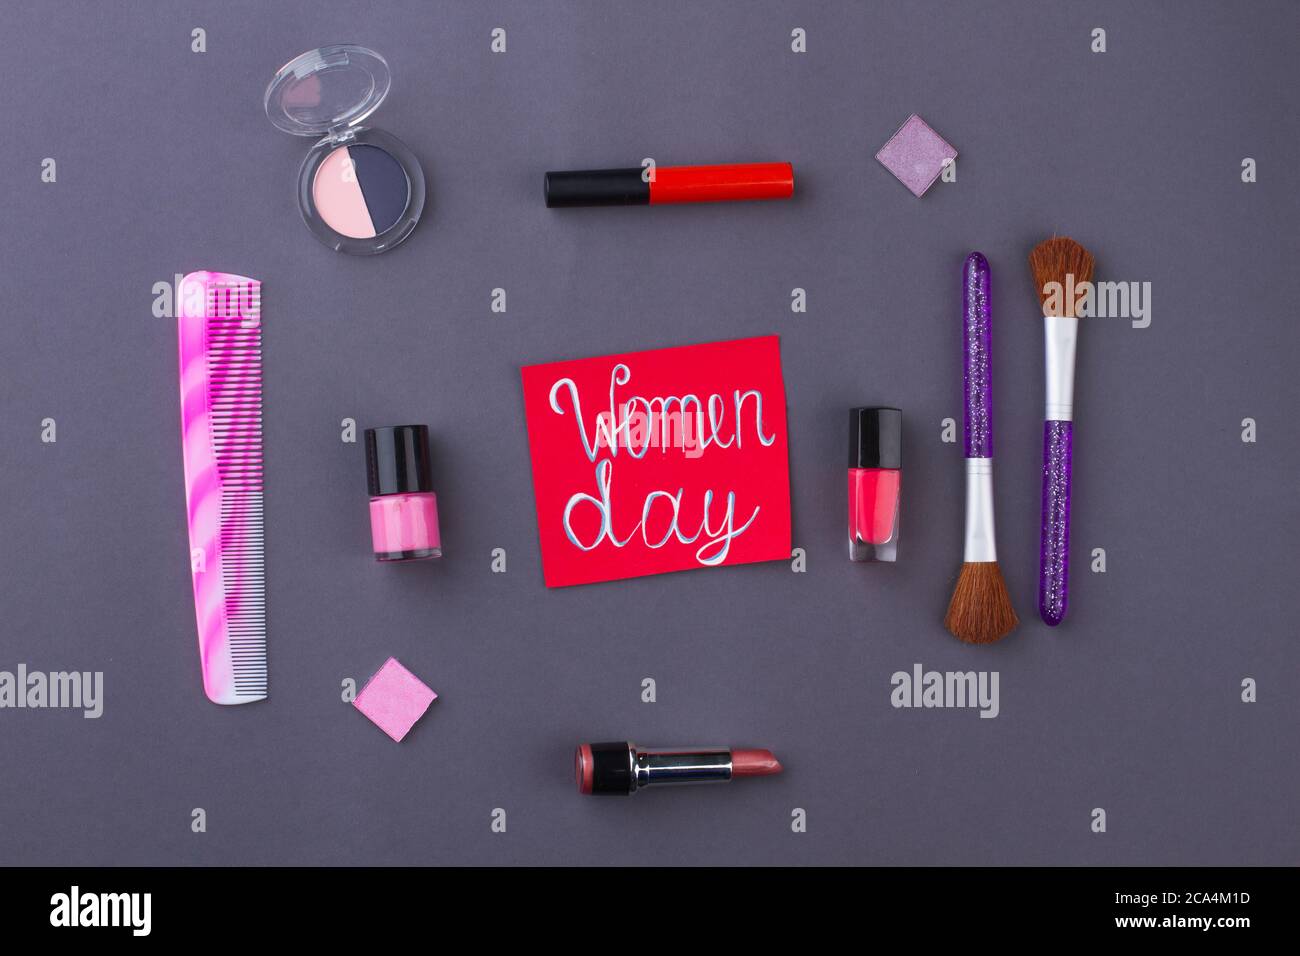 Make up accessories and women day concept. Stock Photo